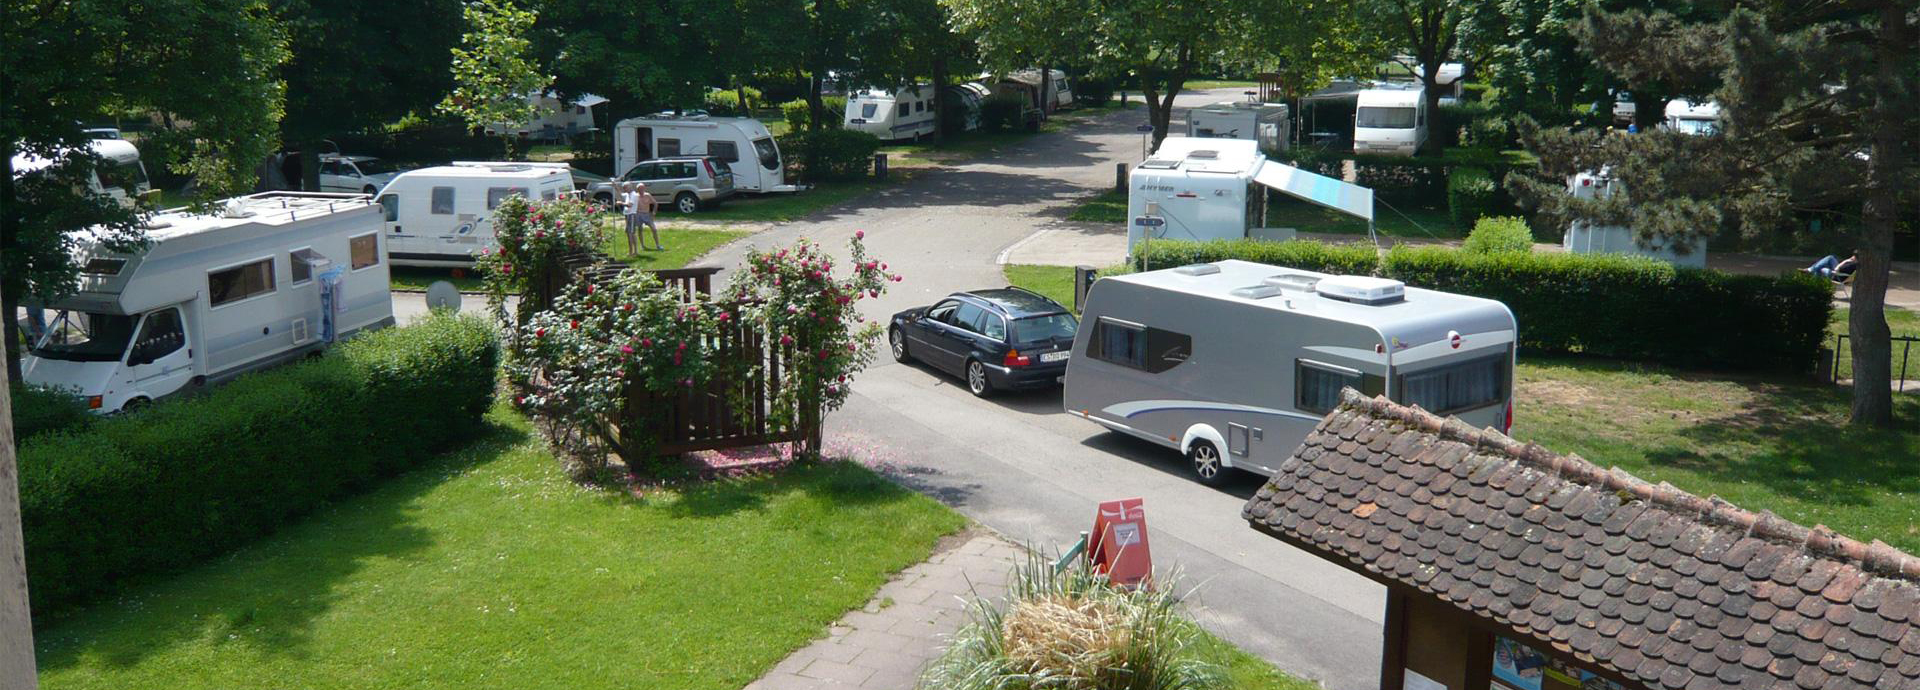 Caravan and camper pitches at the Pierre de Coubertin campsite in Alsace